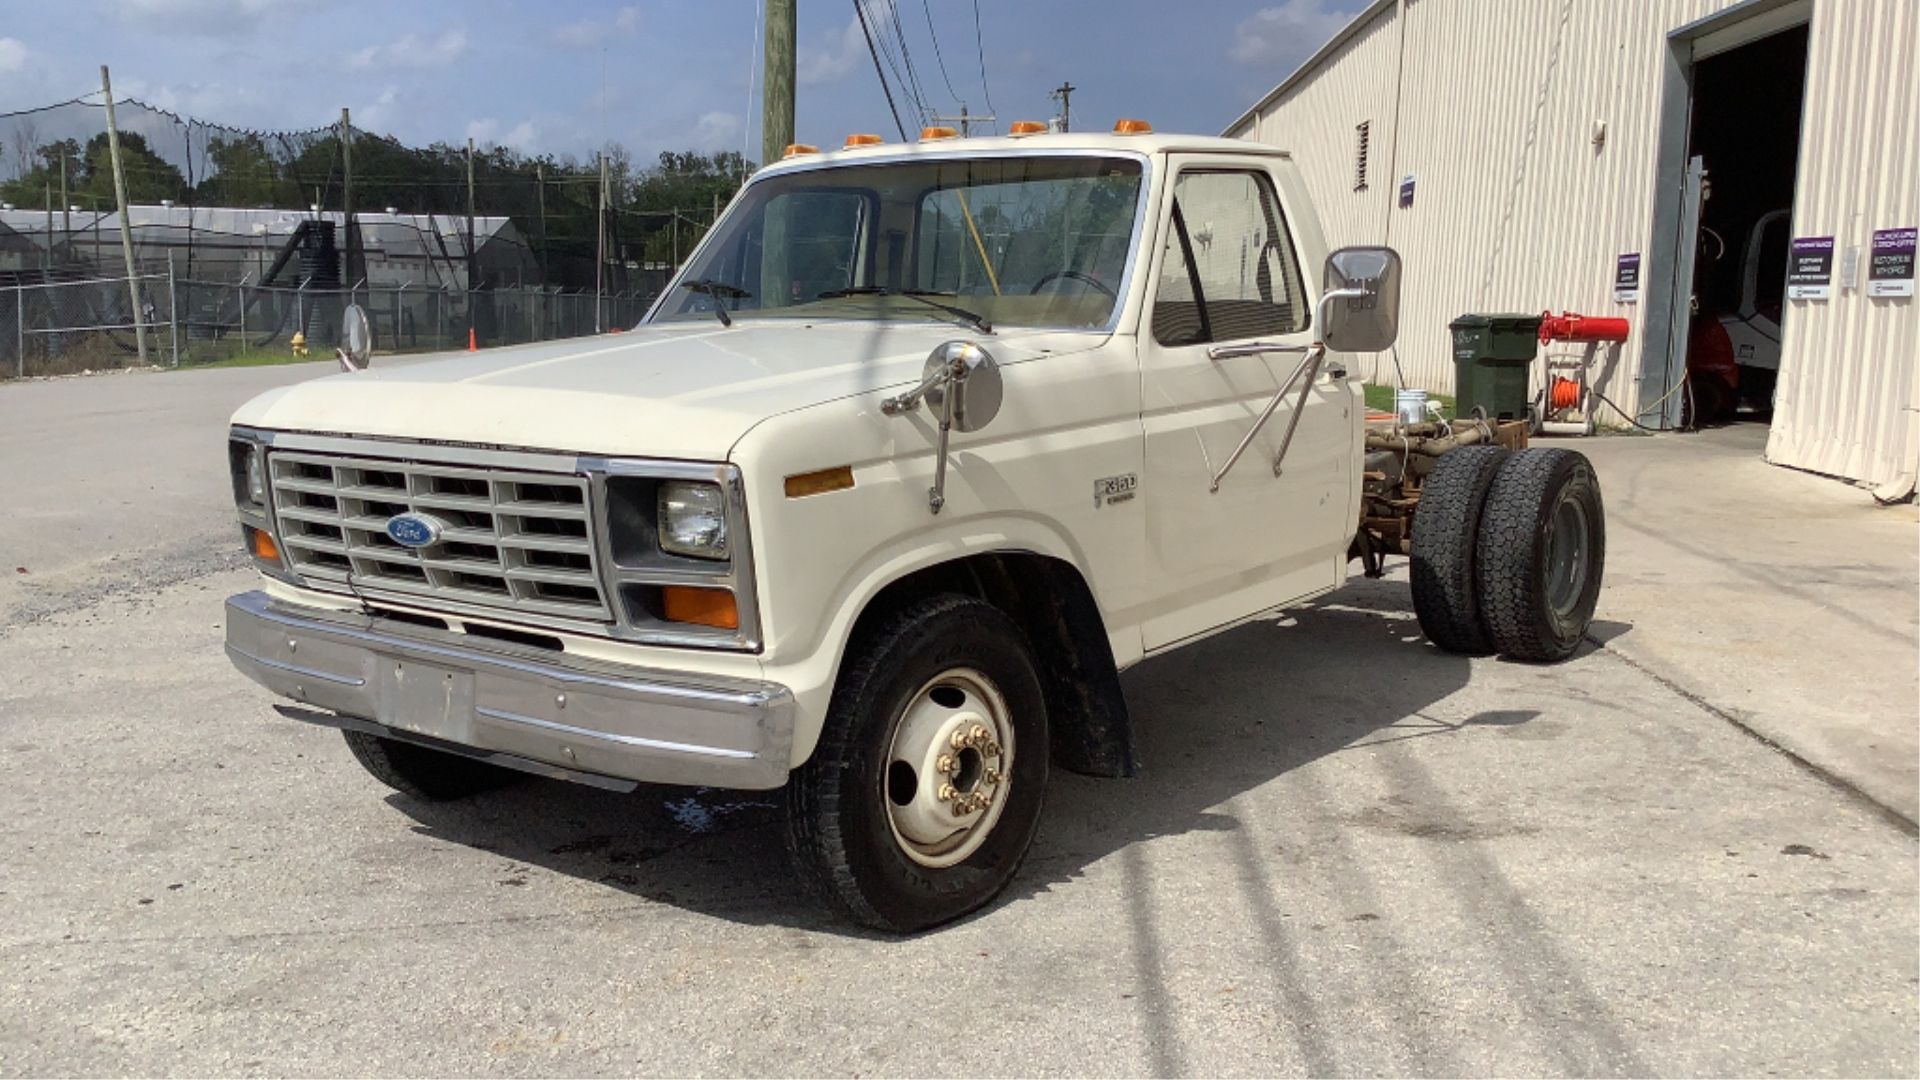 1985 Ford F-350 Regular Cab Chassis Truck 2WD - Image 8 of 83